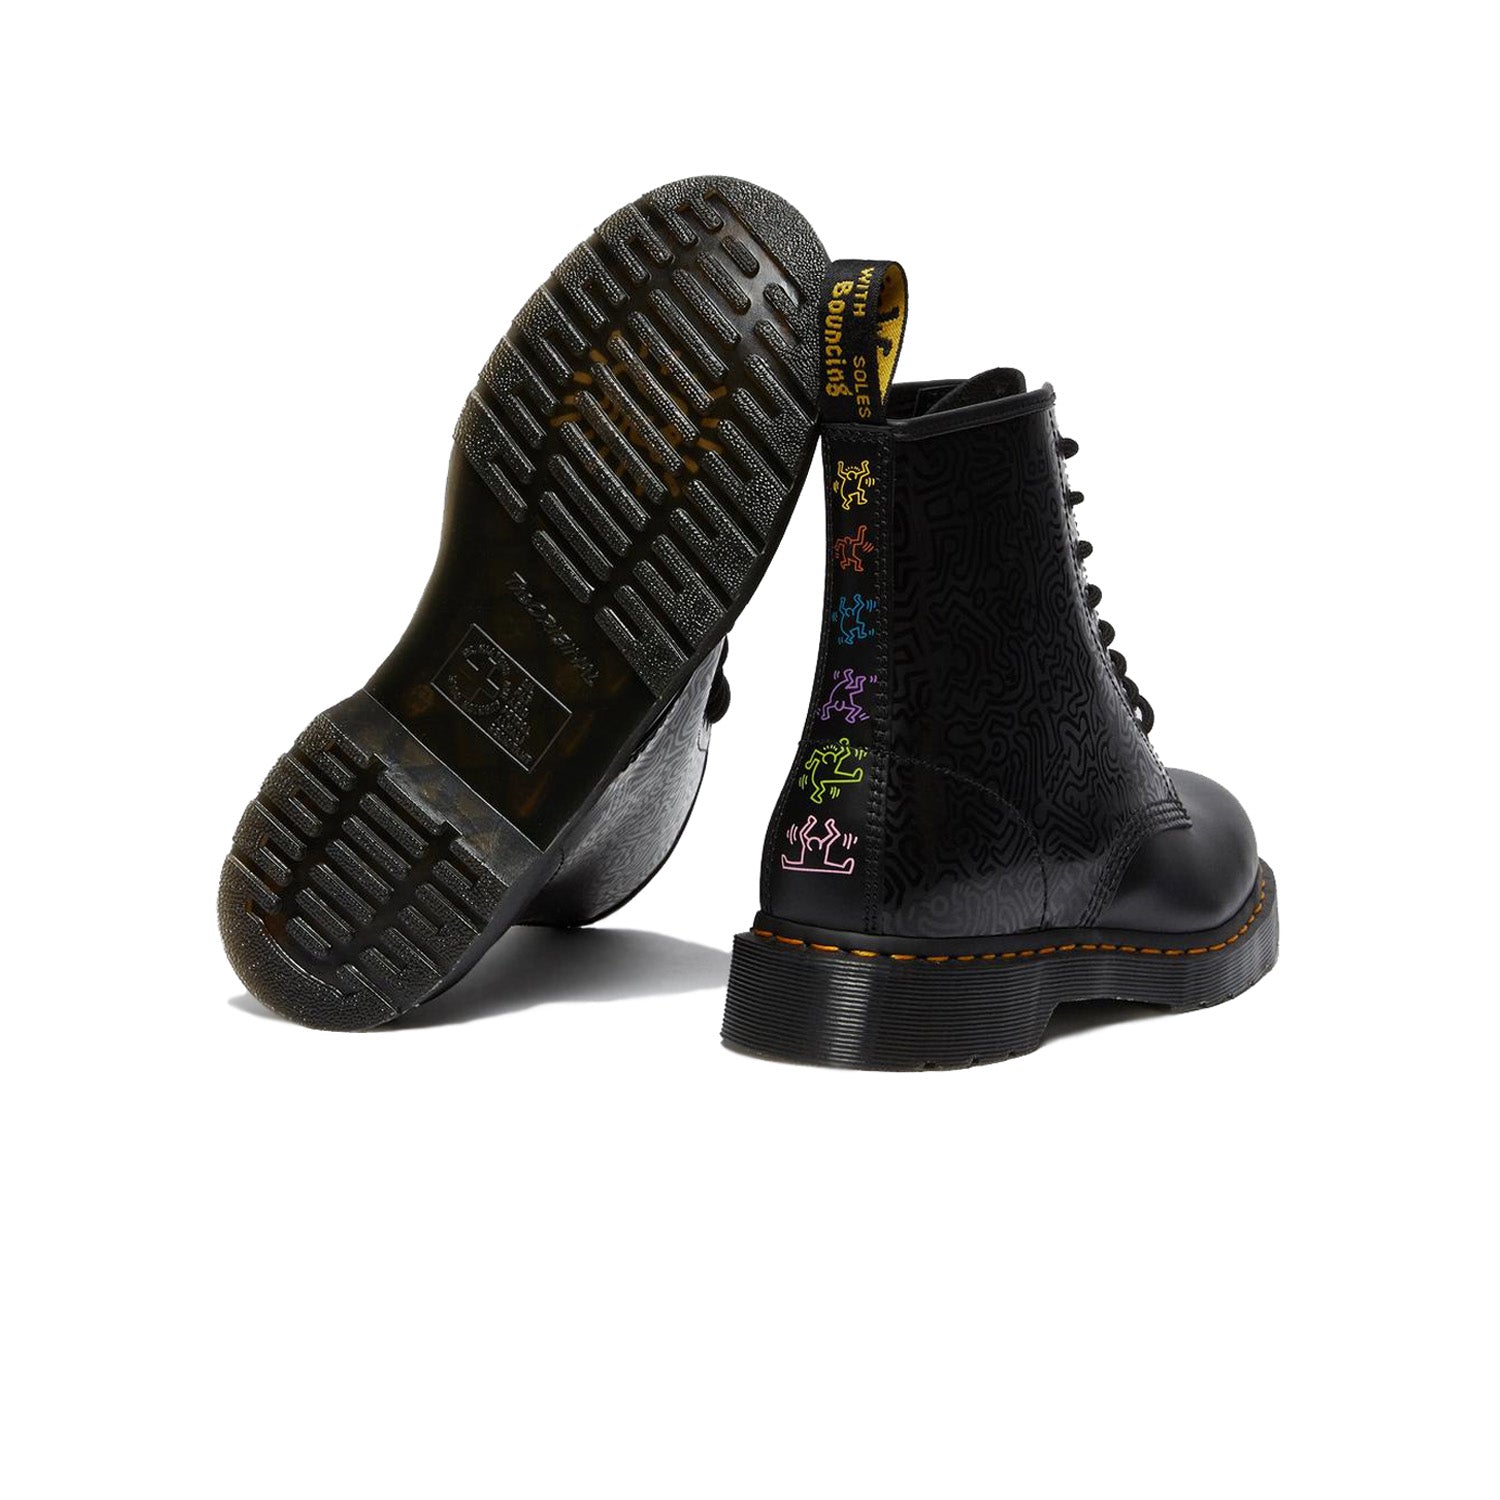 Dr. Martens 1460 Keith Haring Leather Ankle Boots Black Smooth